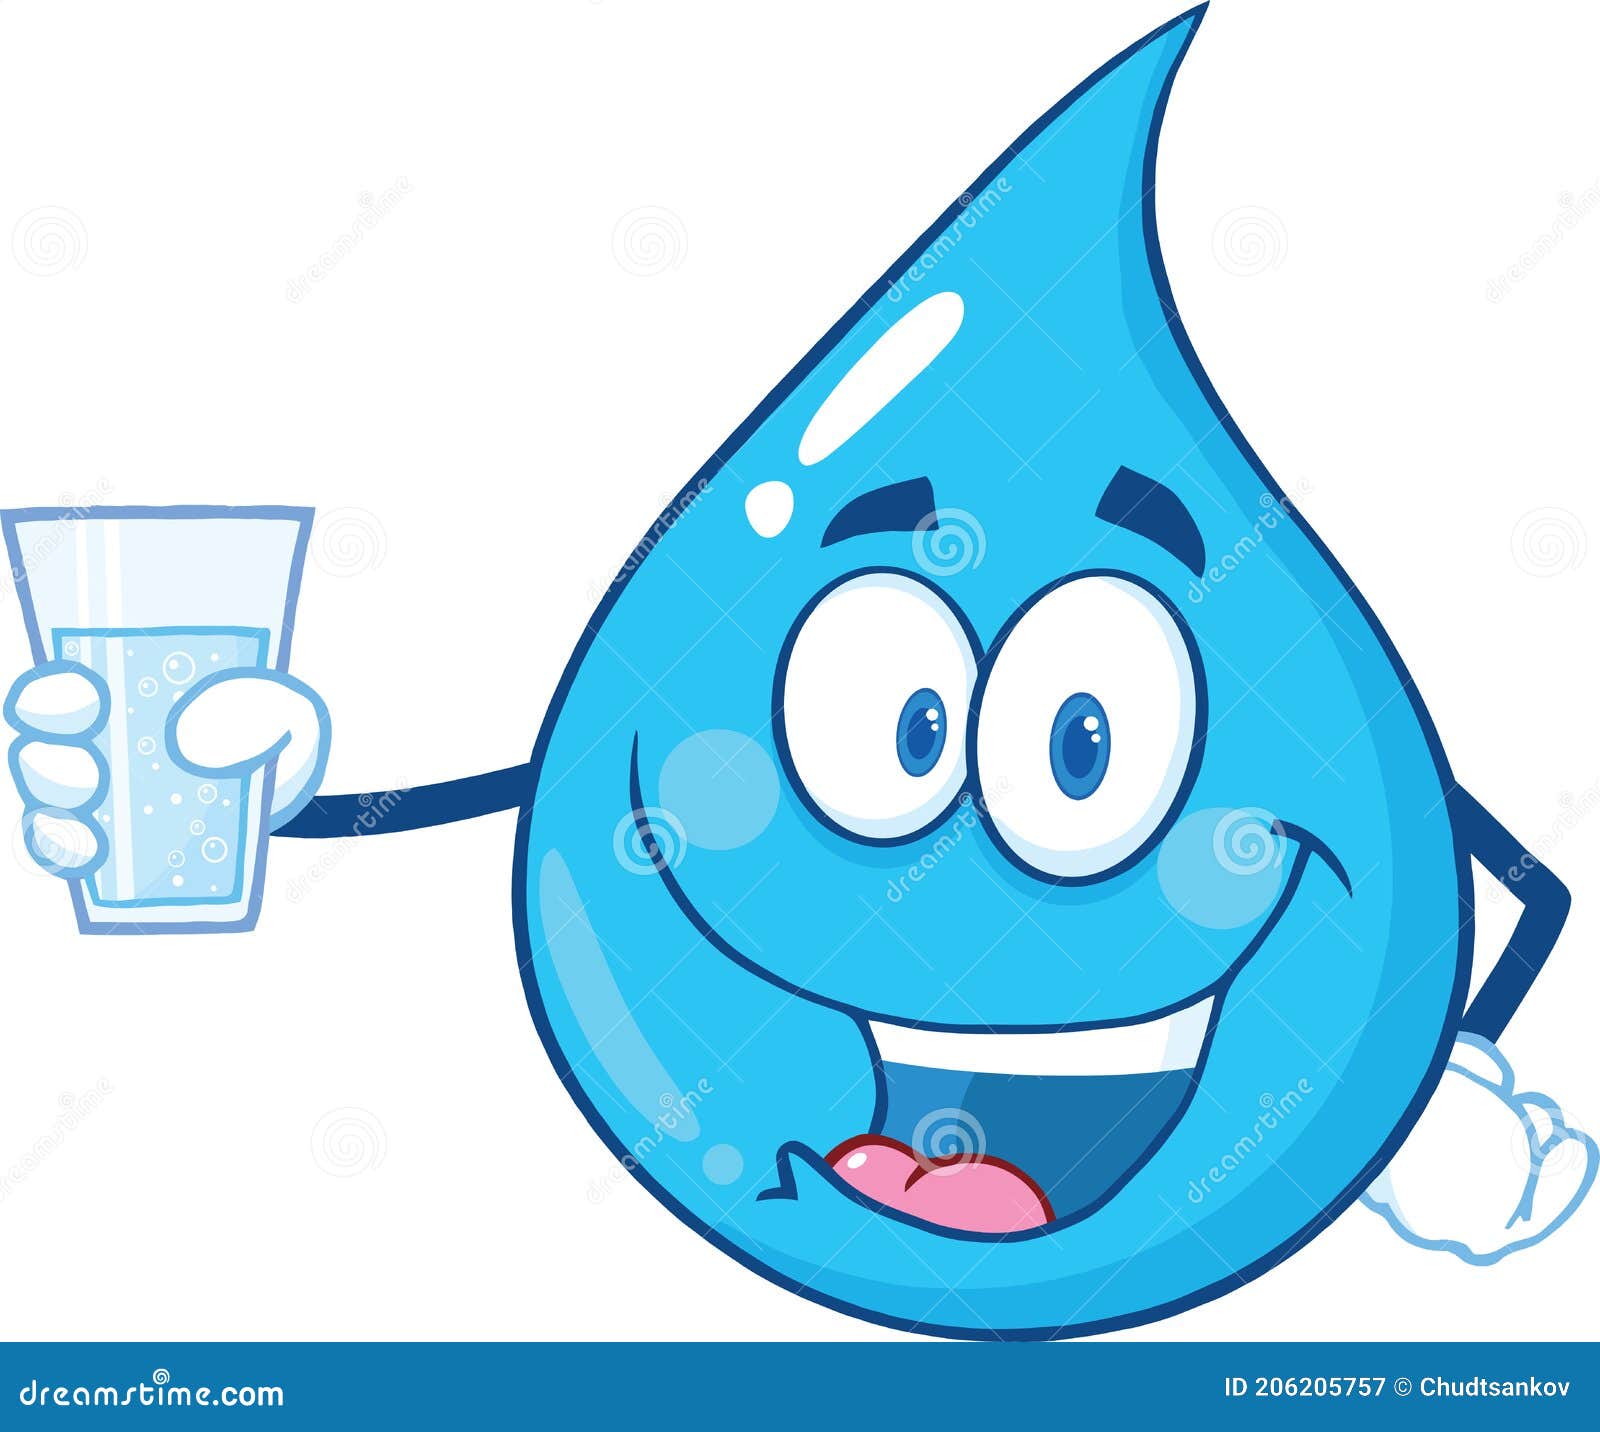 Water Drop Character Holding a Water Glass Stock Illustration -  Illustration of colorful, friendly: 206205757